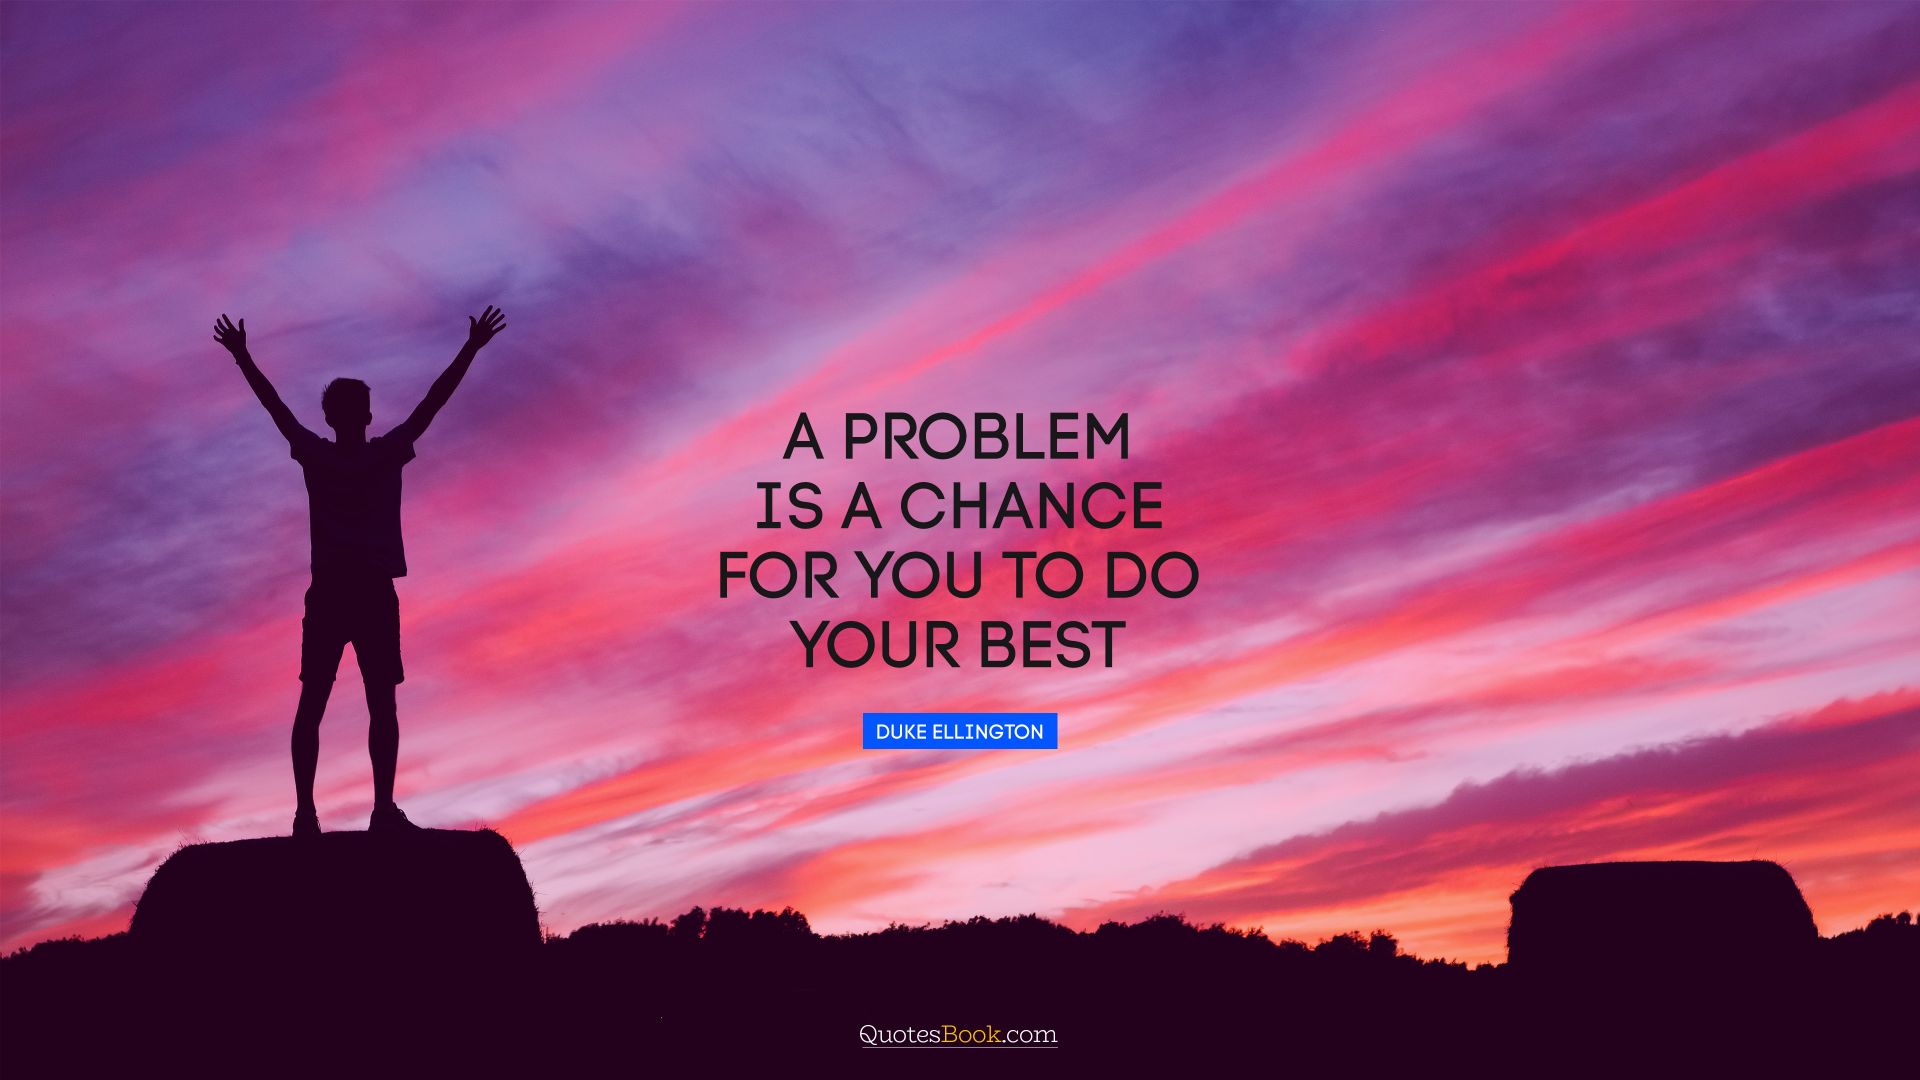 A problem is a chance for you to do your best. - Quote by Duke Ellington